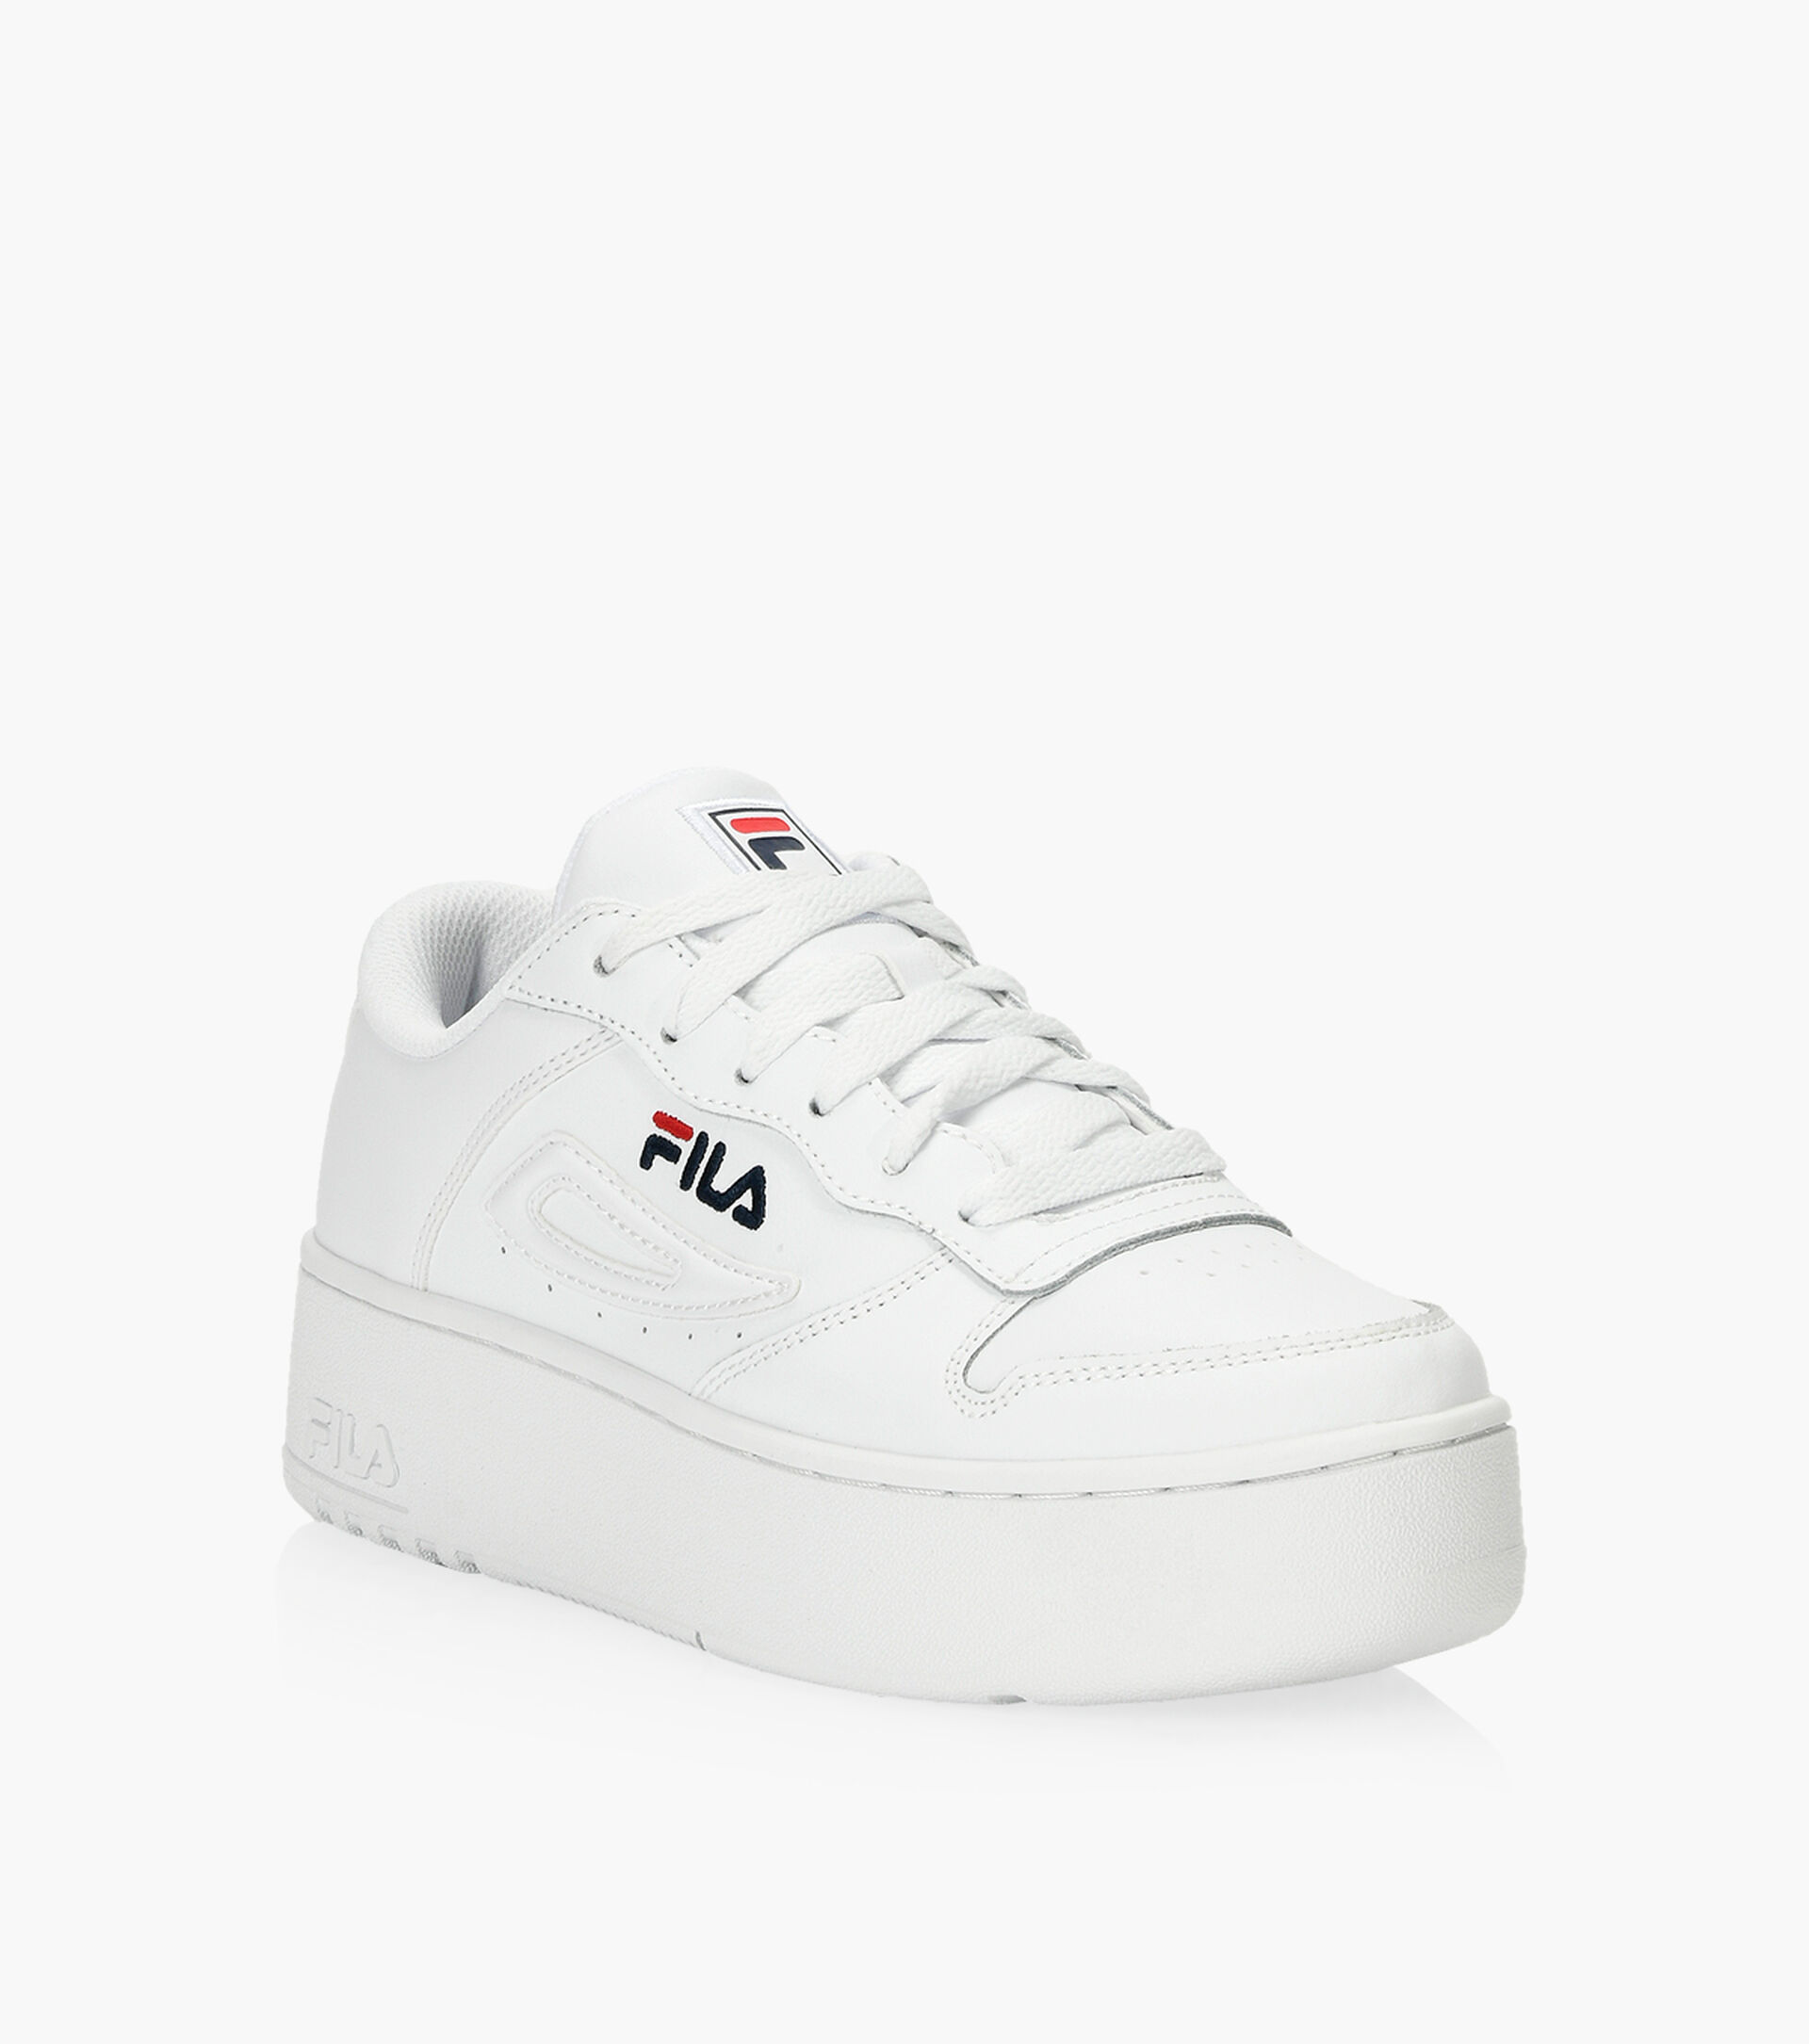 FILA FX-115 - Leather | Browns Shoes